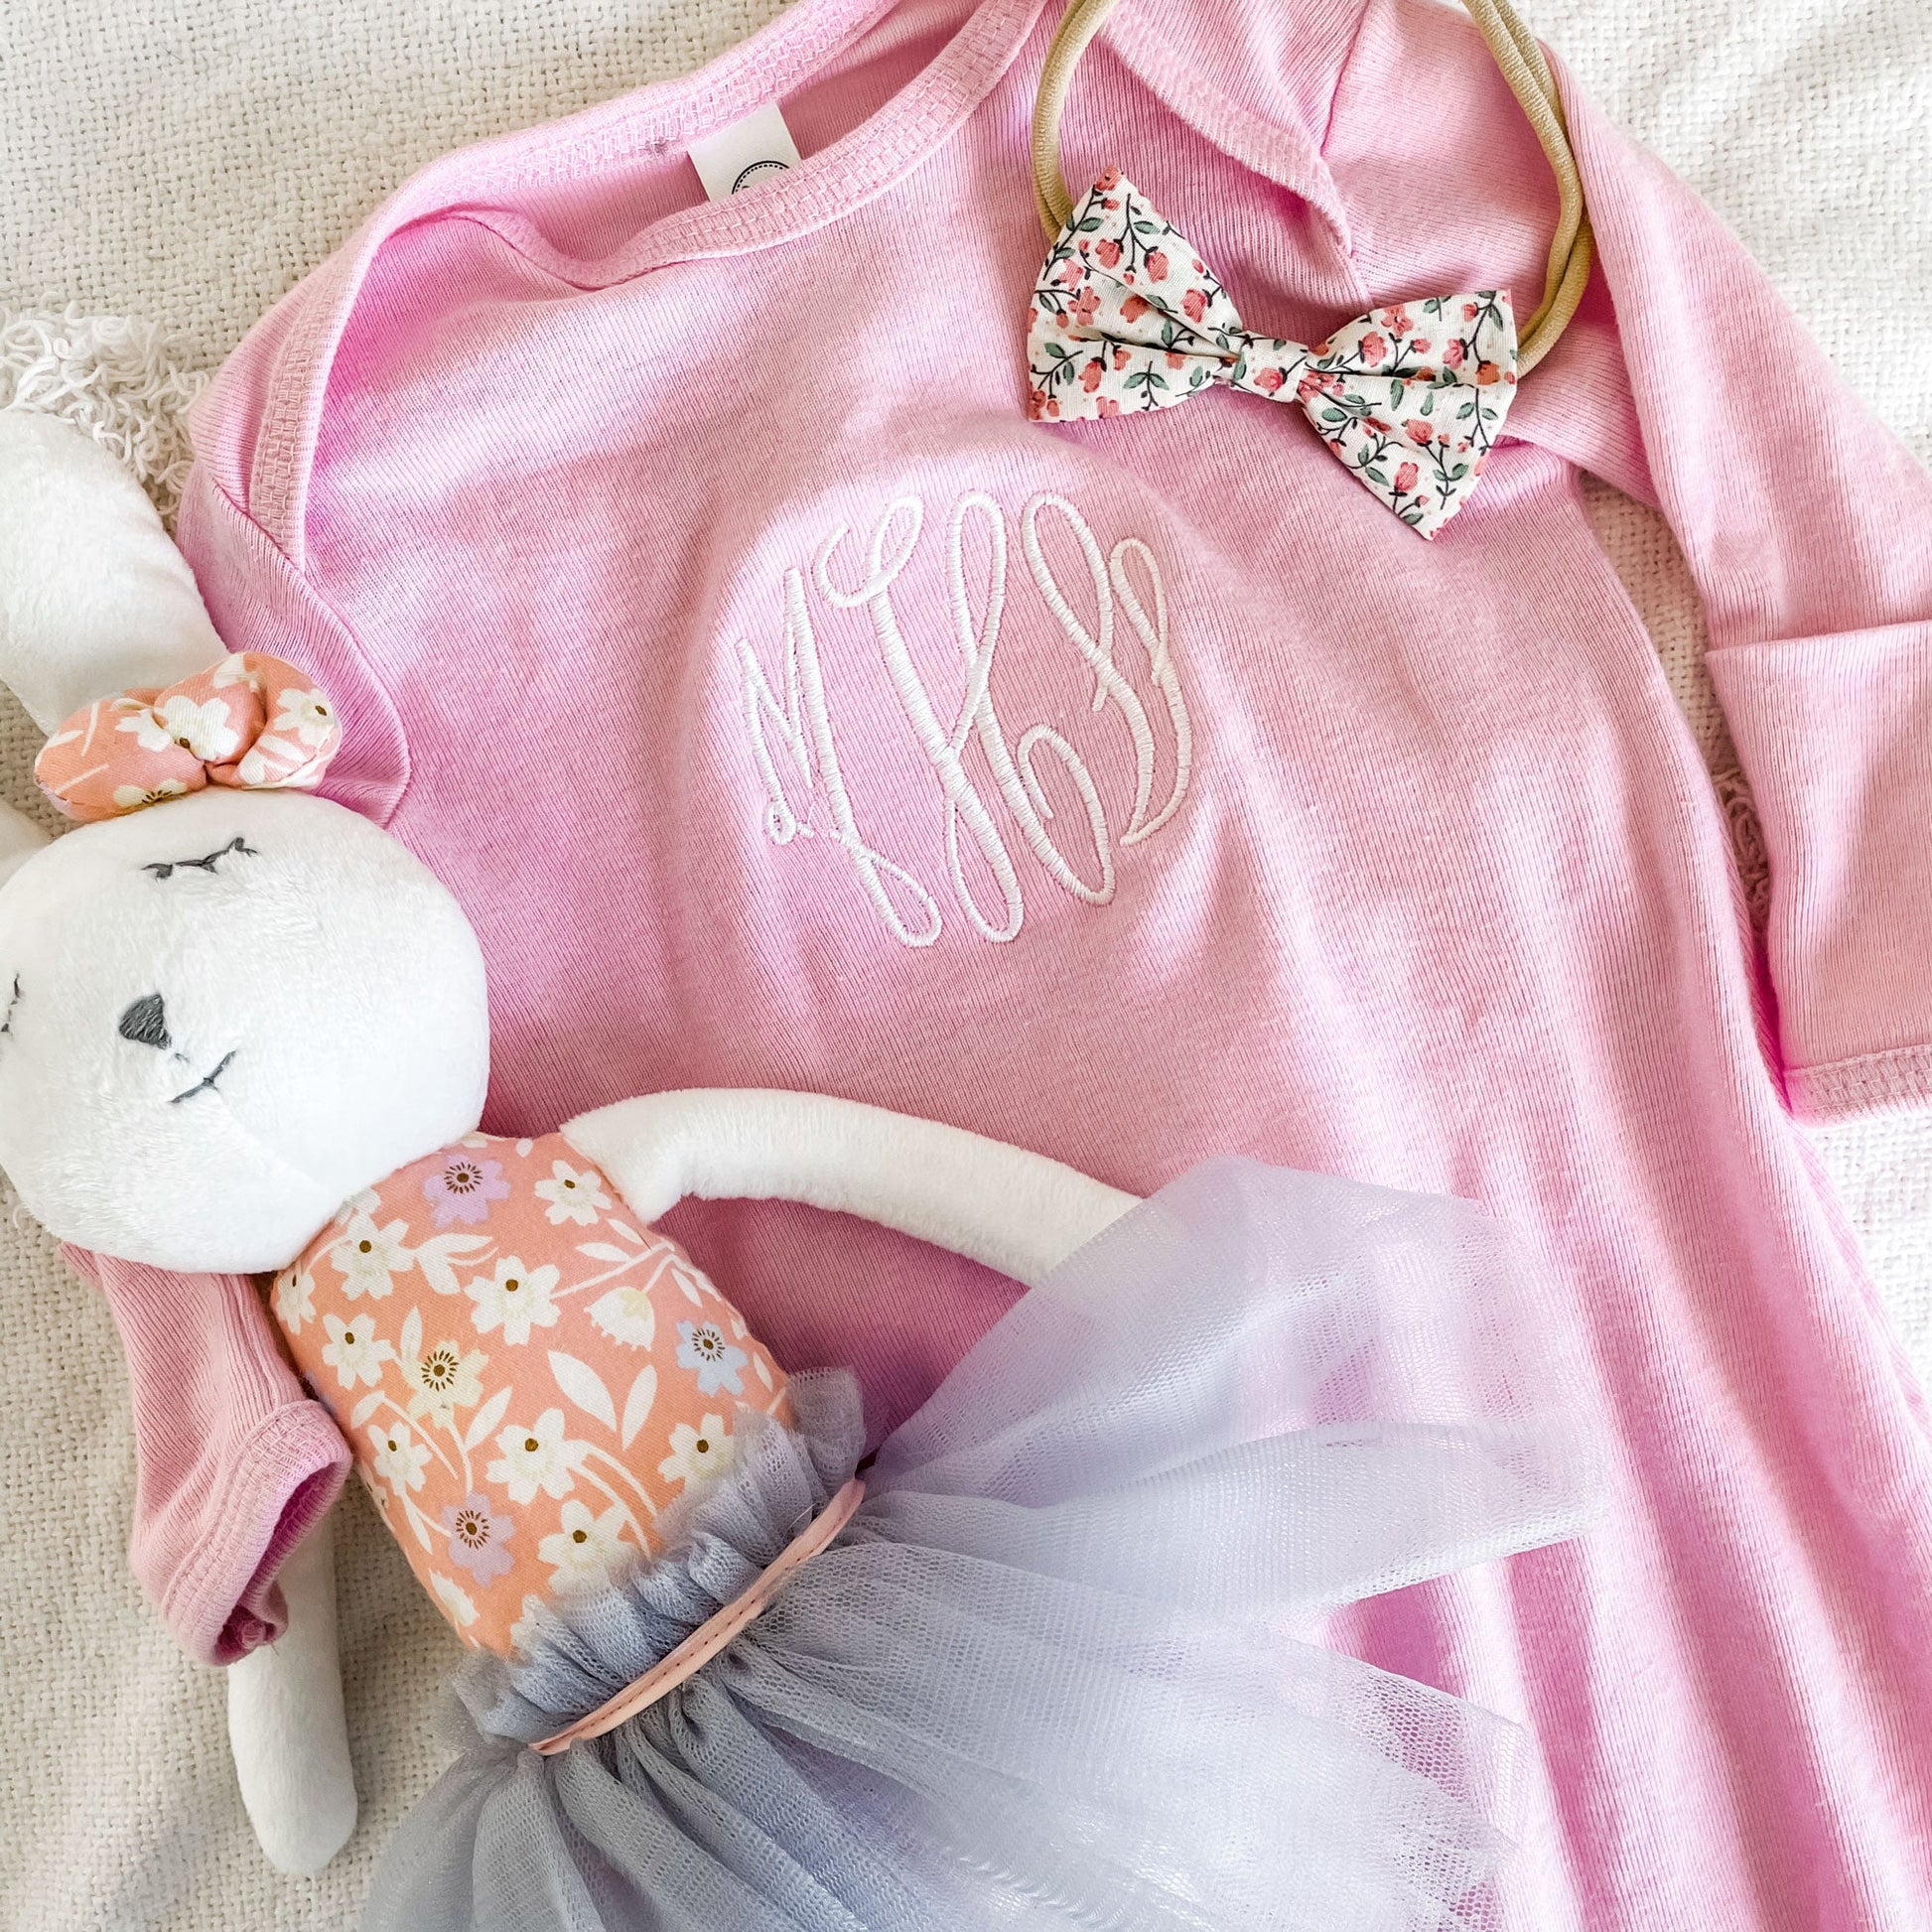 flat lay of pink layette with white embroidery